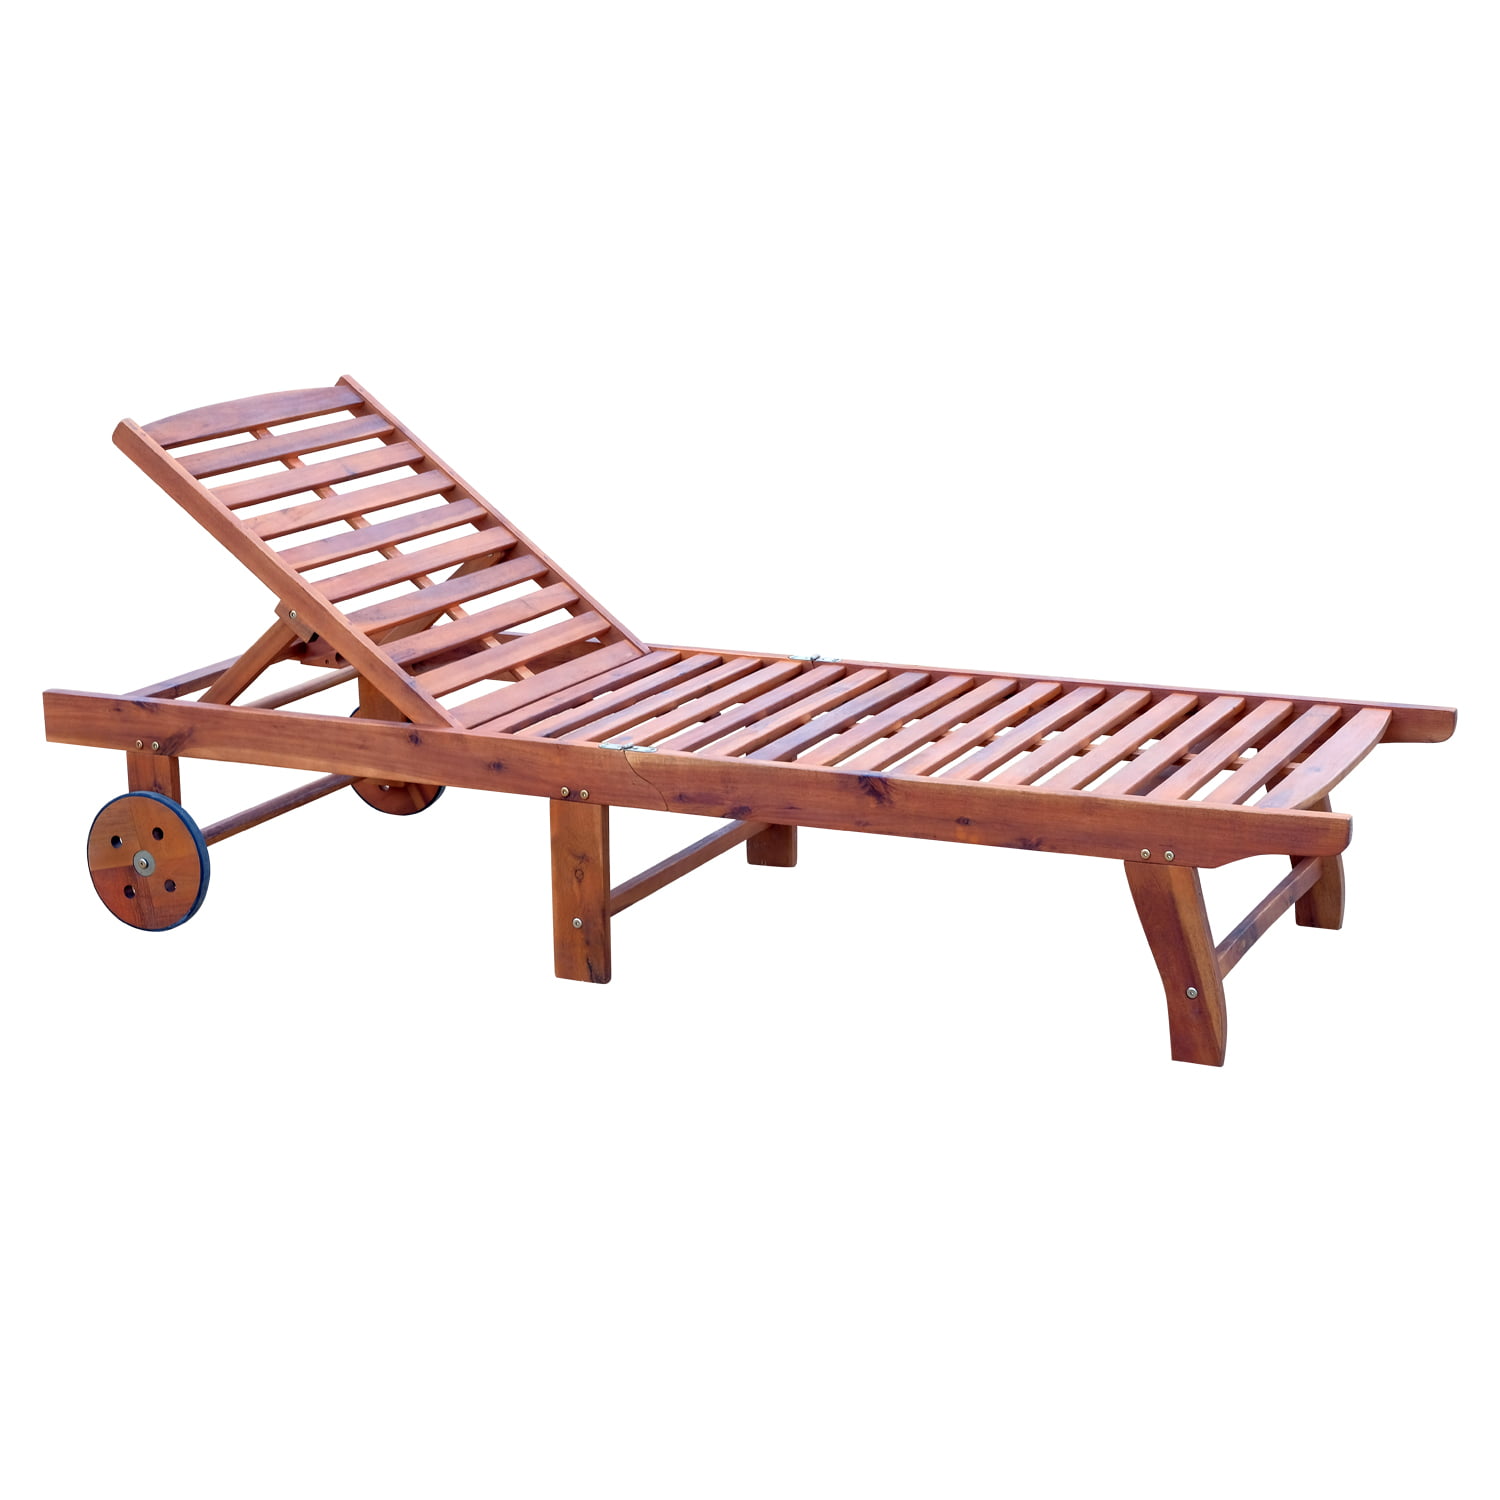 Outsunny Wooden Outdoor Folding Chaise Lounge Chair Recliner with